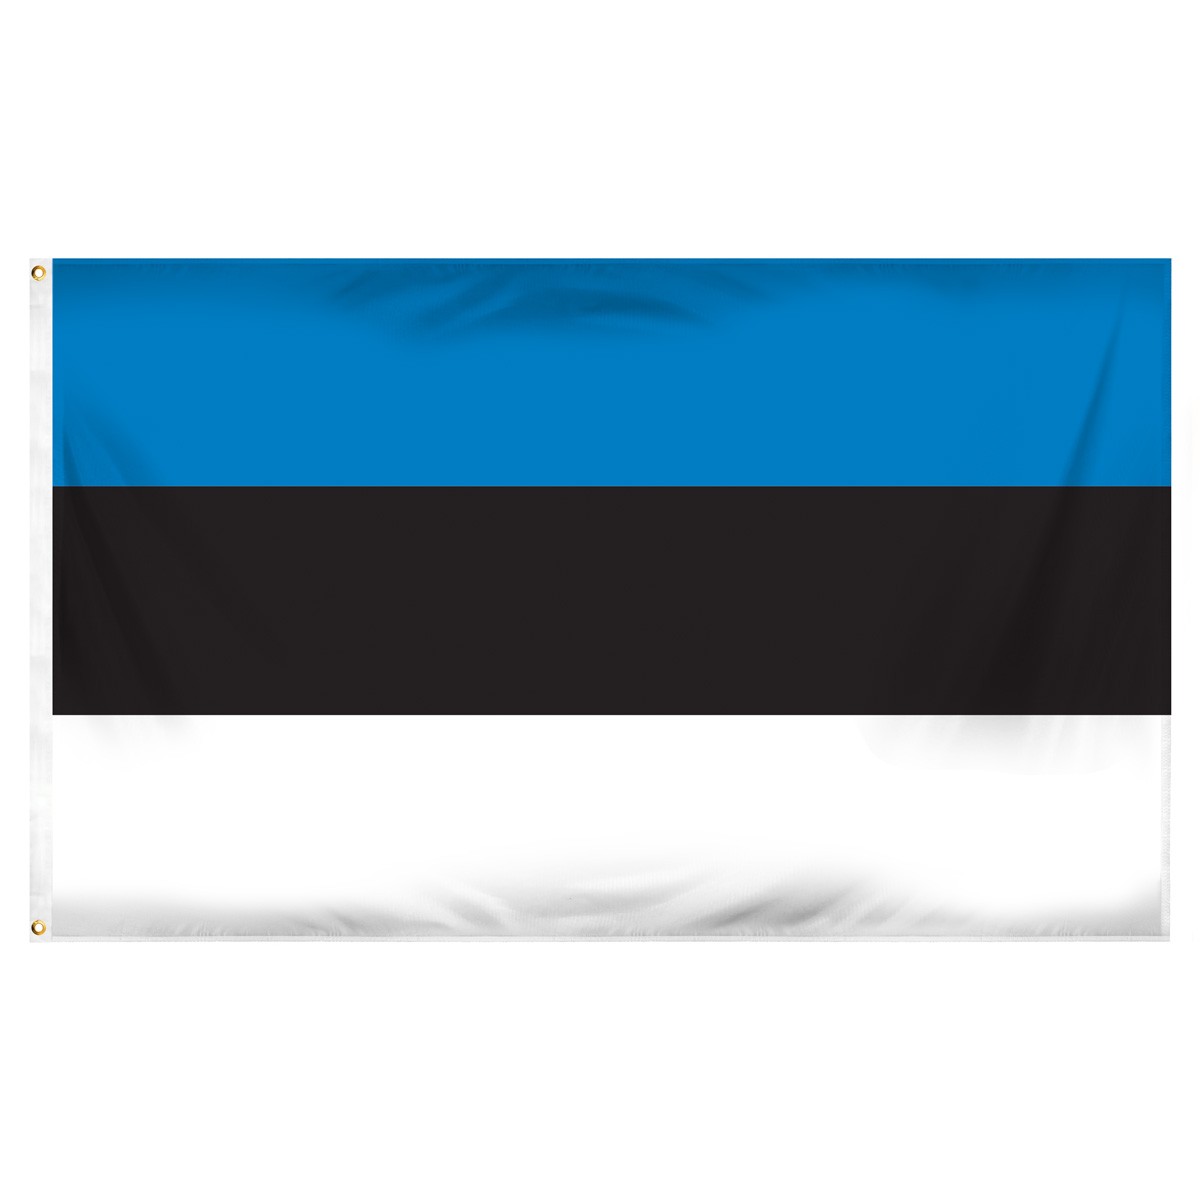 Estonia Rope Pennants and Flags